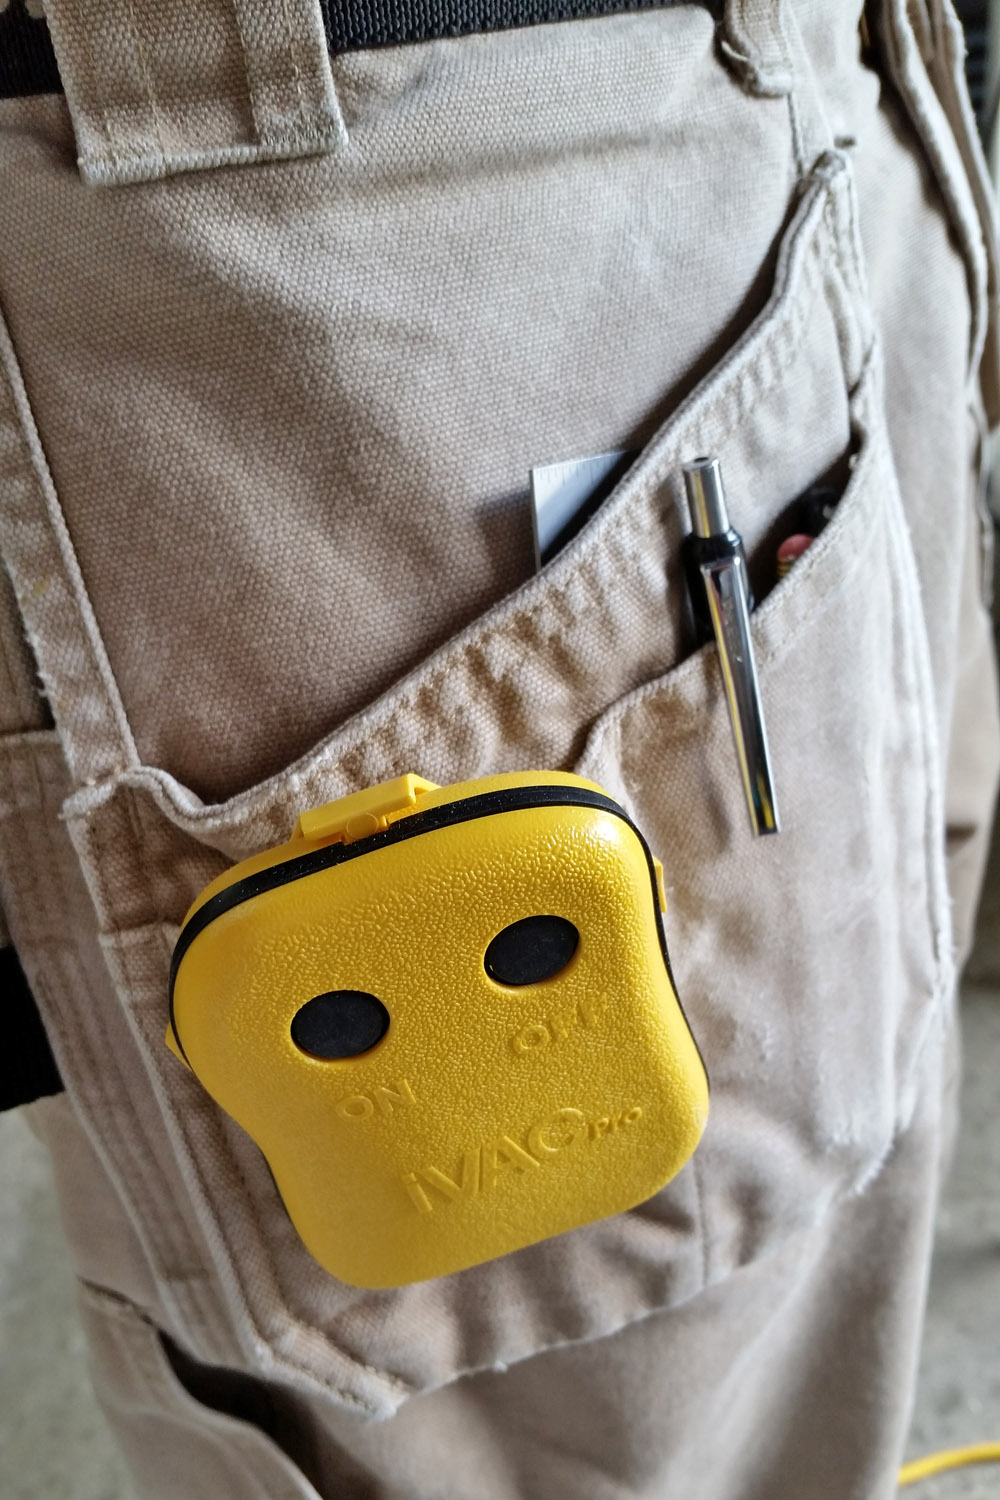 IVAC remote clipped to my pocket